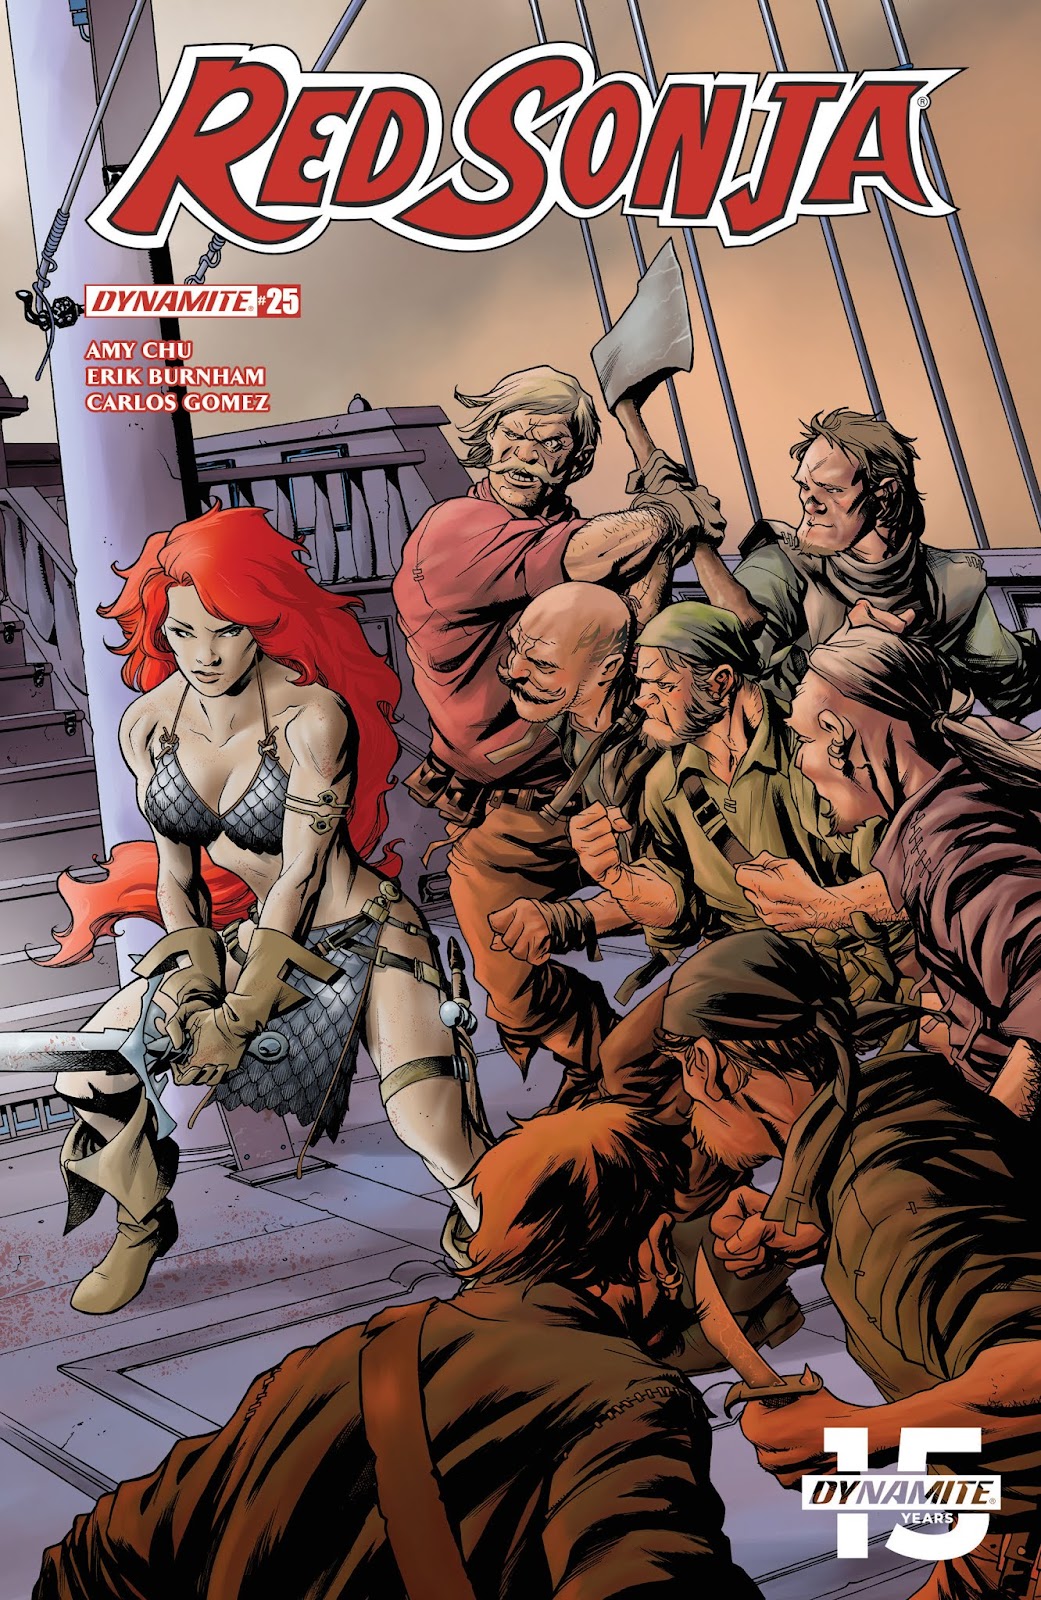 Red Sonja Vol. 4 issue 25 - Page 1